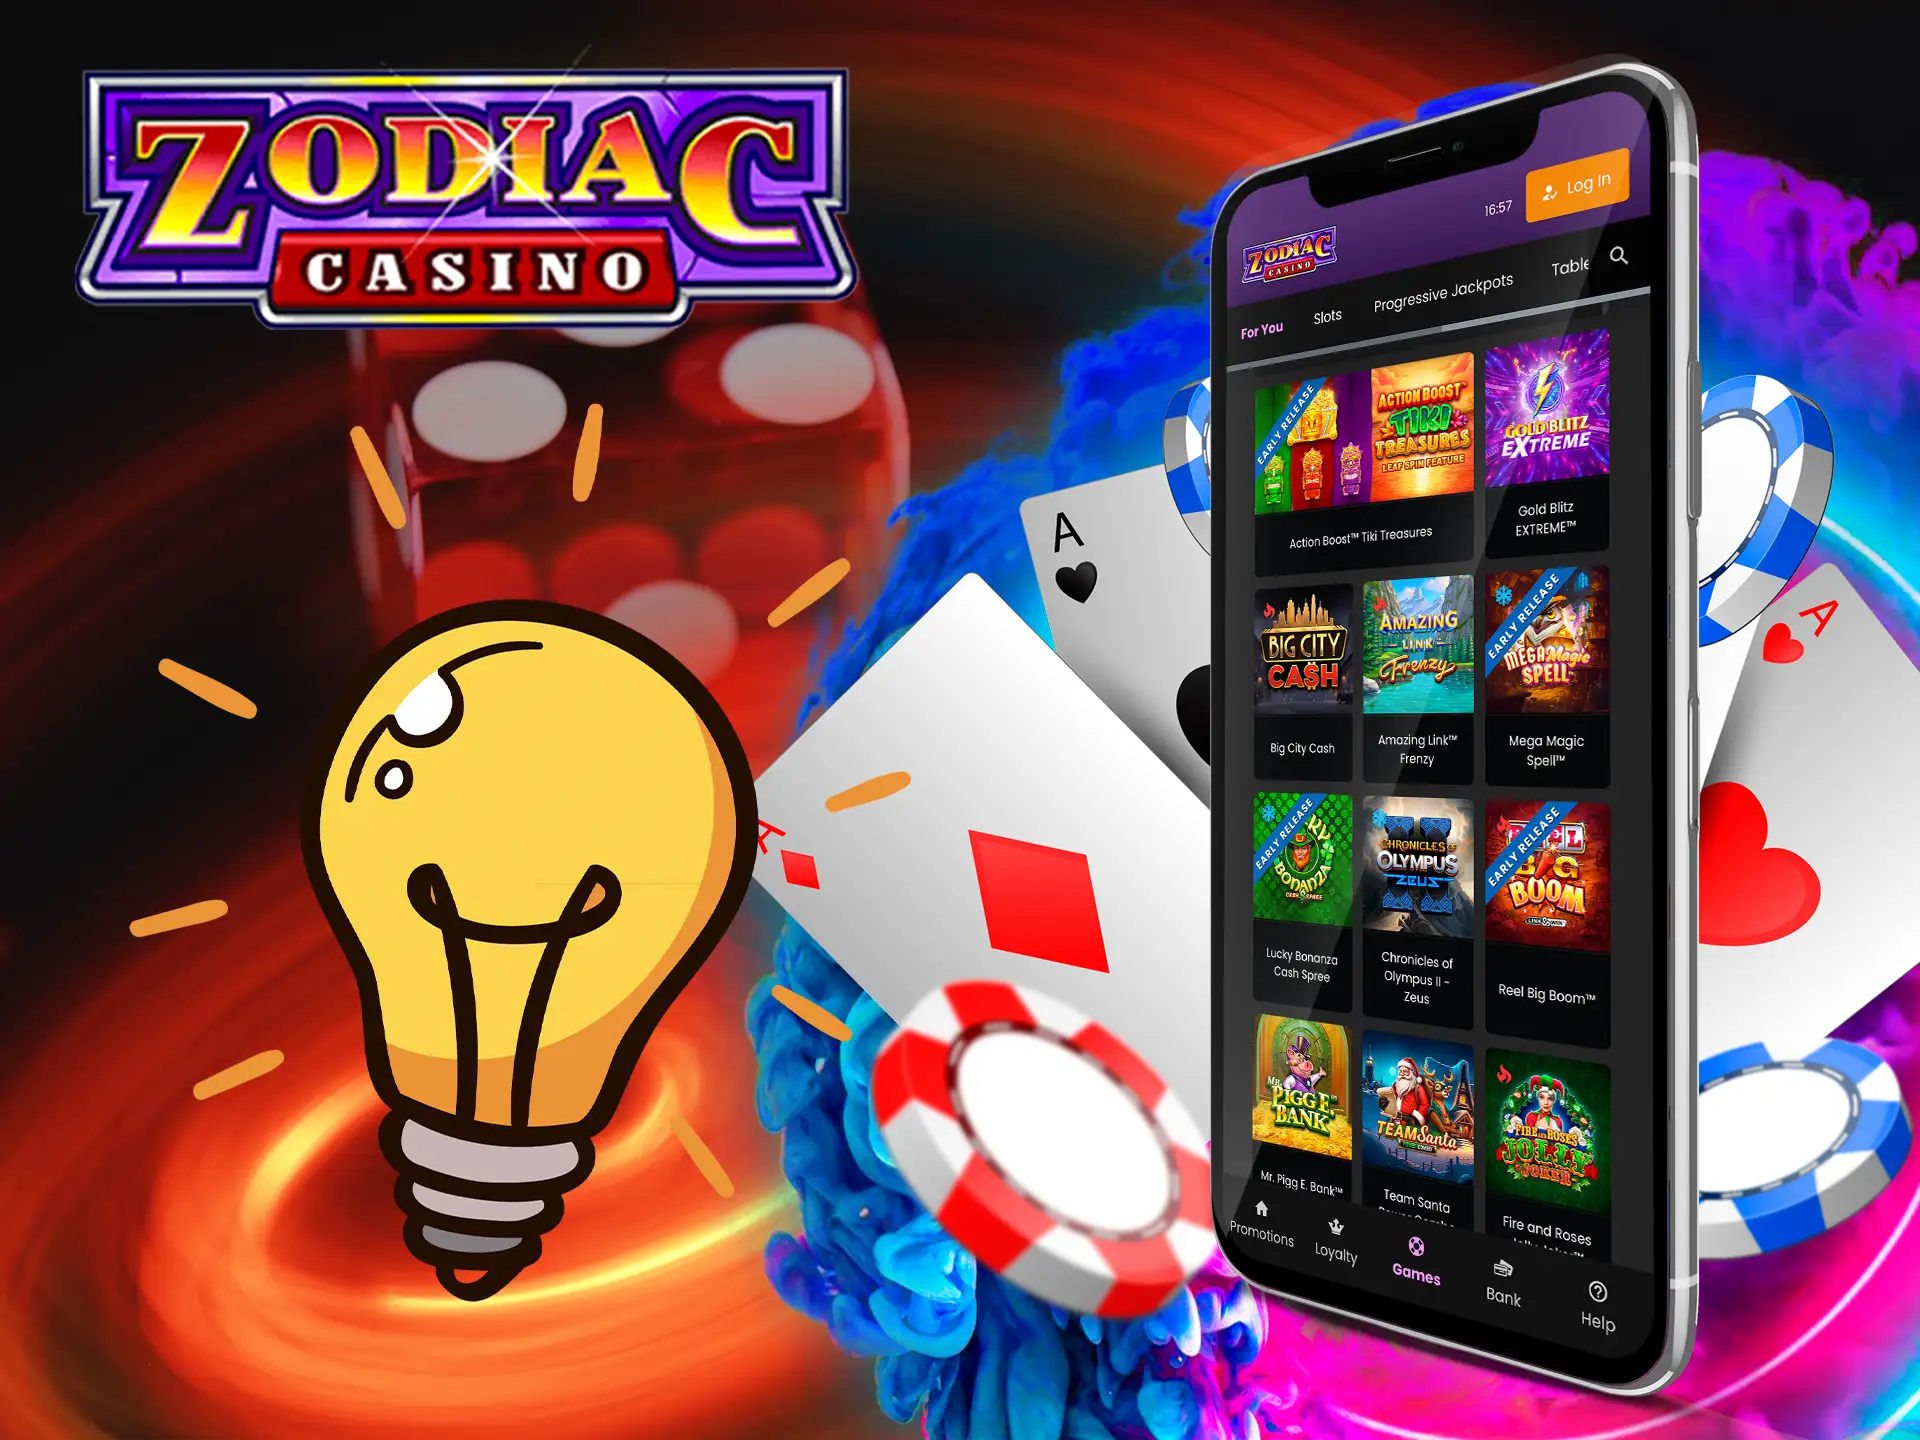 On the site, players will find a wide range of games that makes Zodiac Casino distinctive.